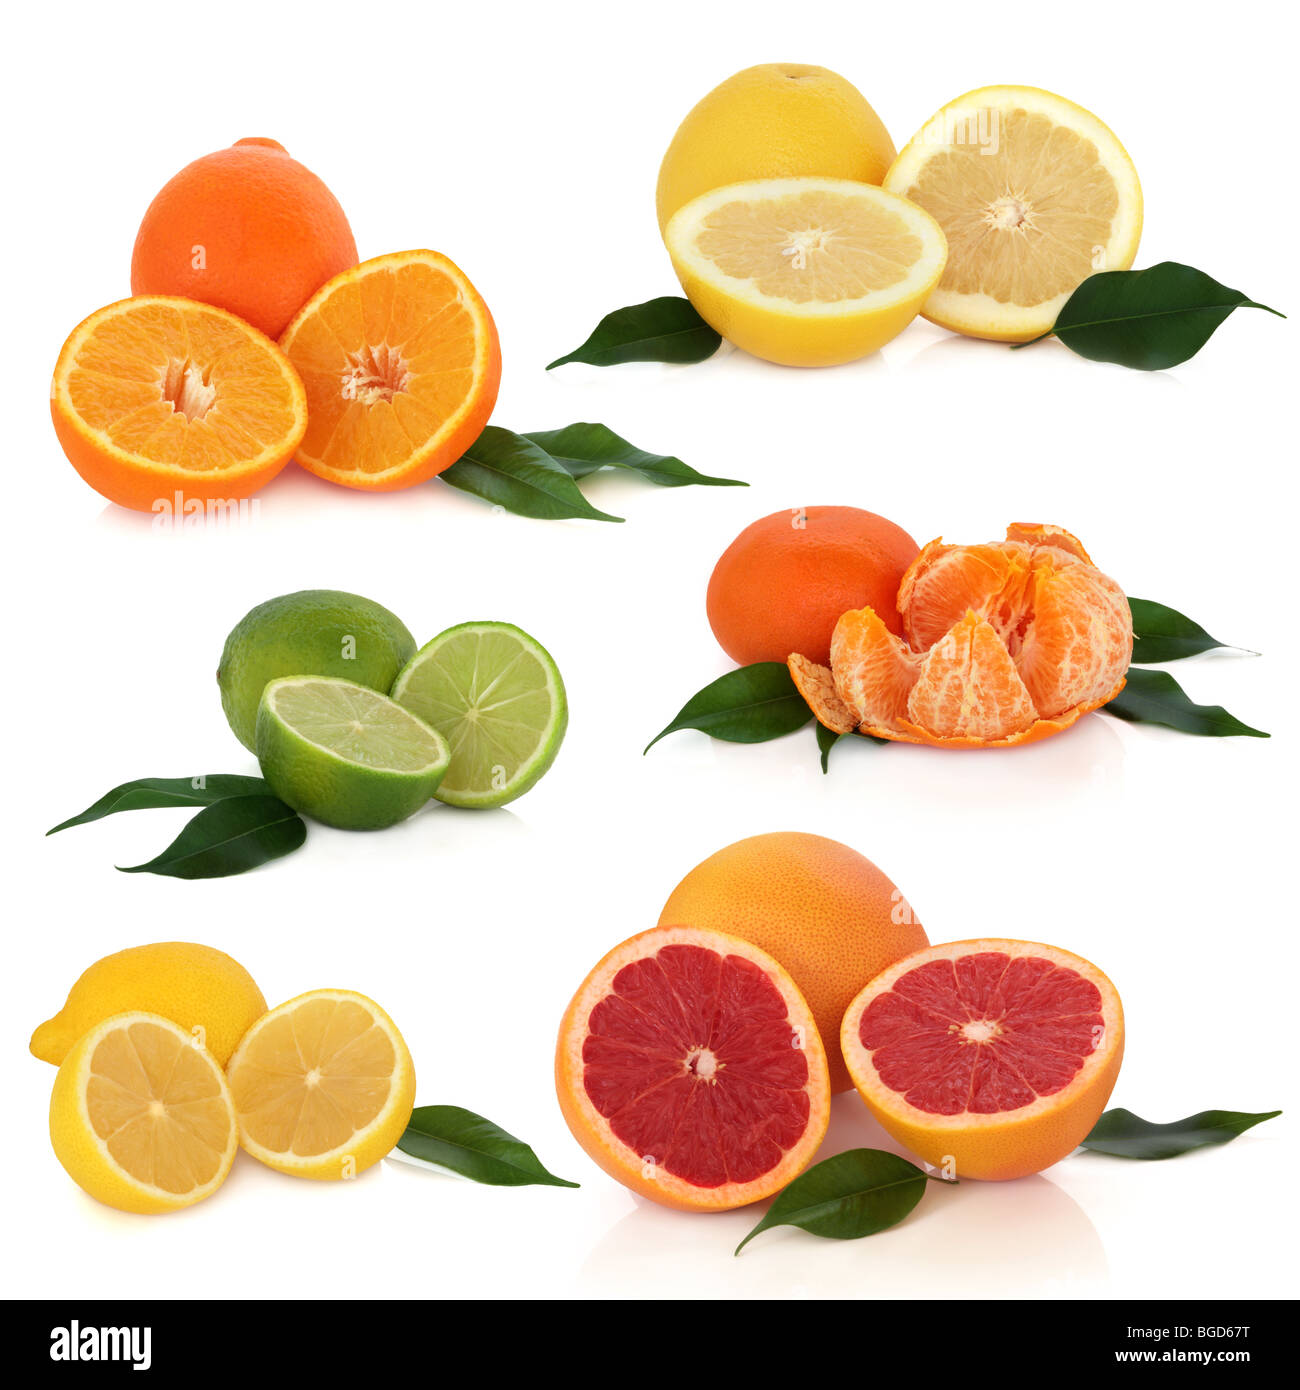 Citrus fruit collection of lemons, limes, oranges, tangerine and grapefruit with leaf sprigs, isolated over white background. Stock Photo